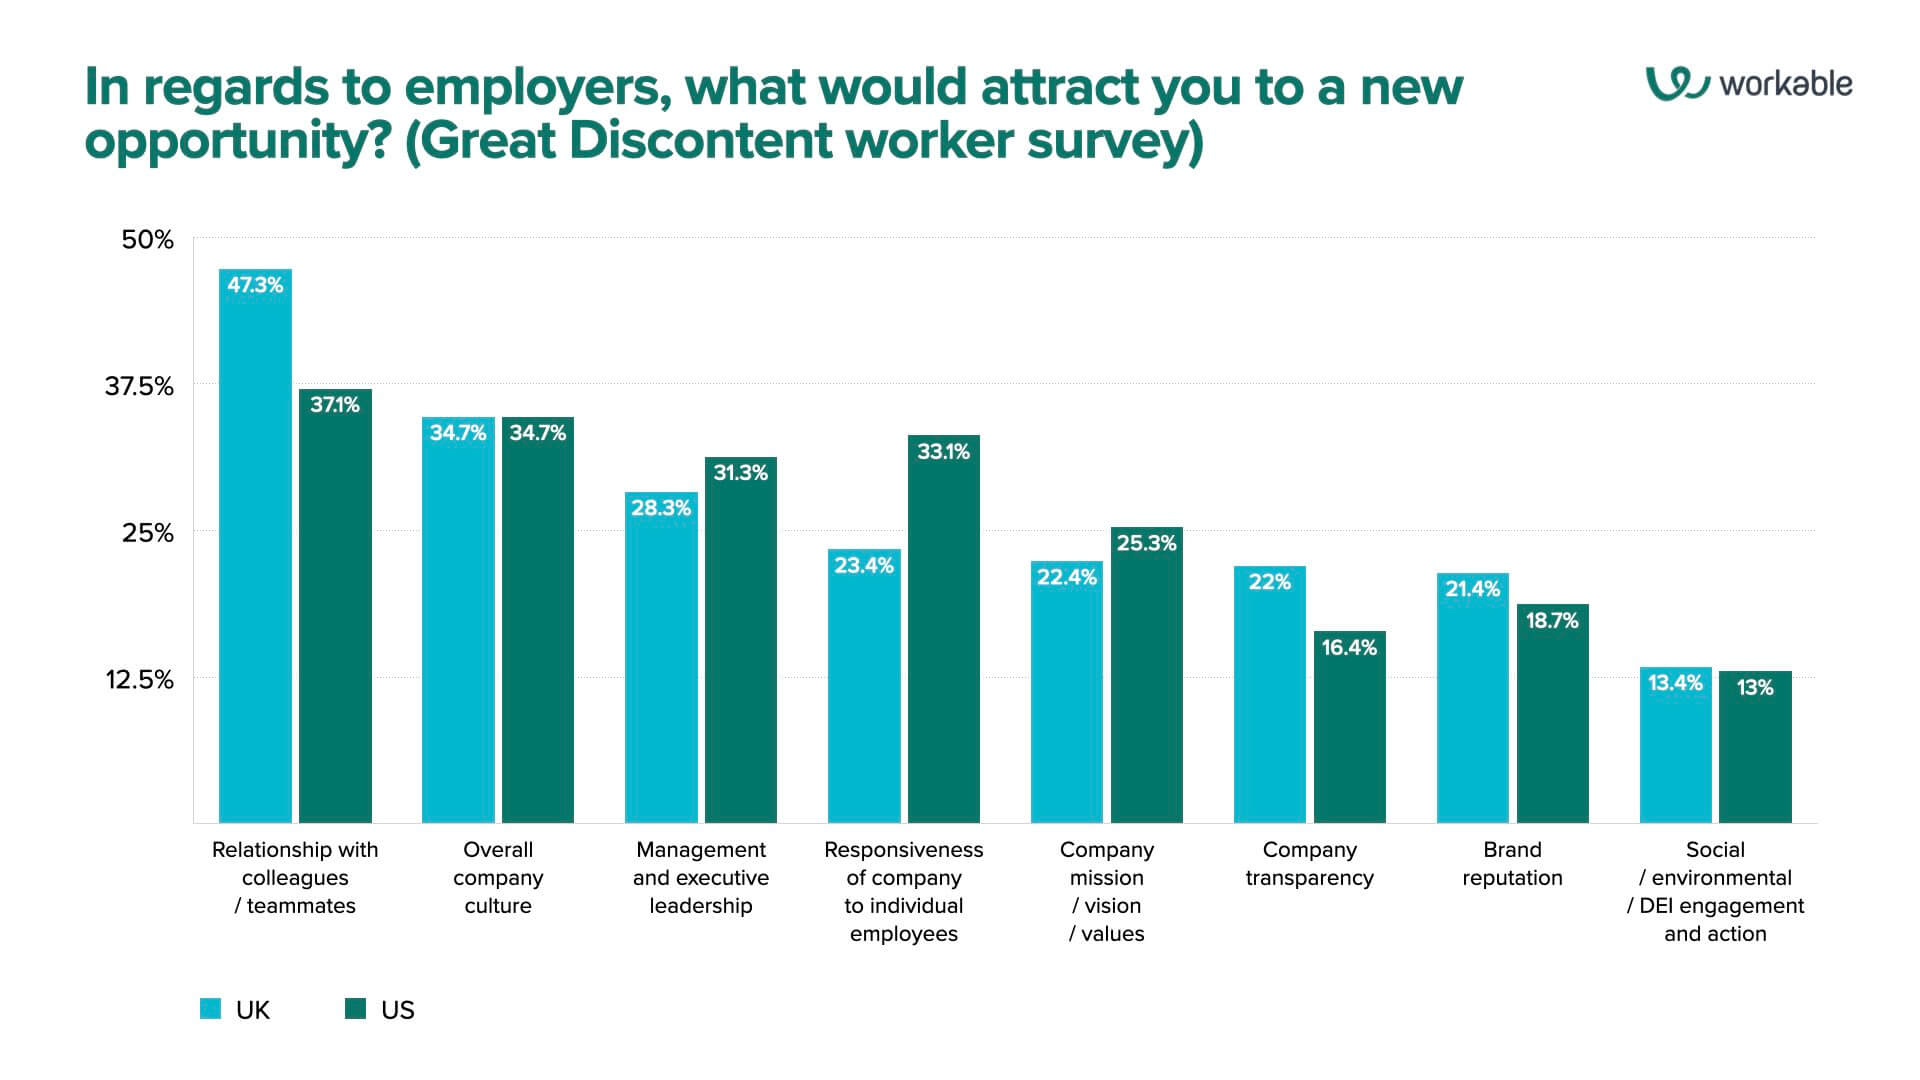 Great Discontent employer attractors showing relationships with colleagues as a leading perk